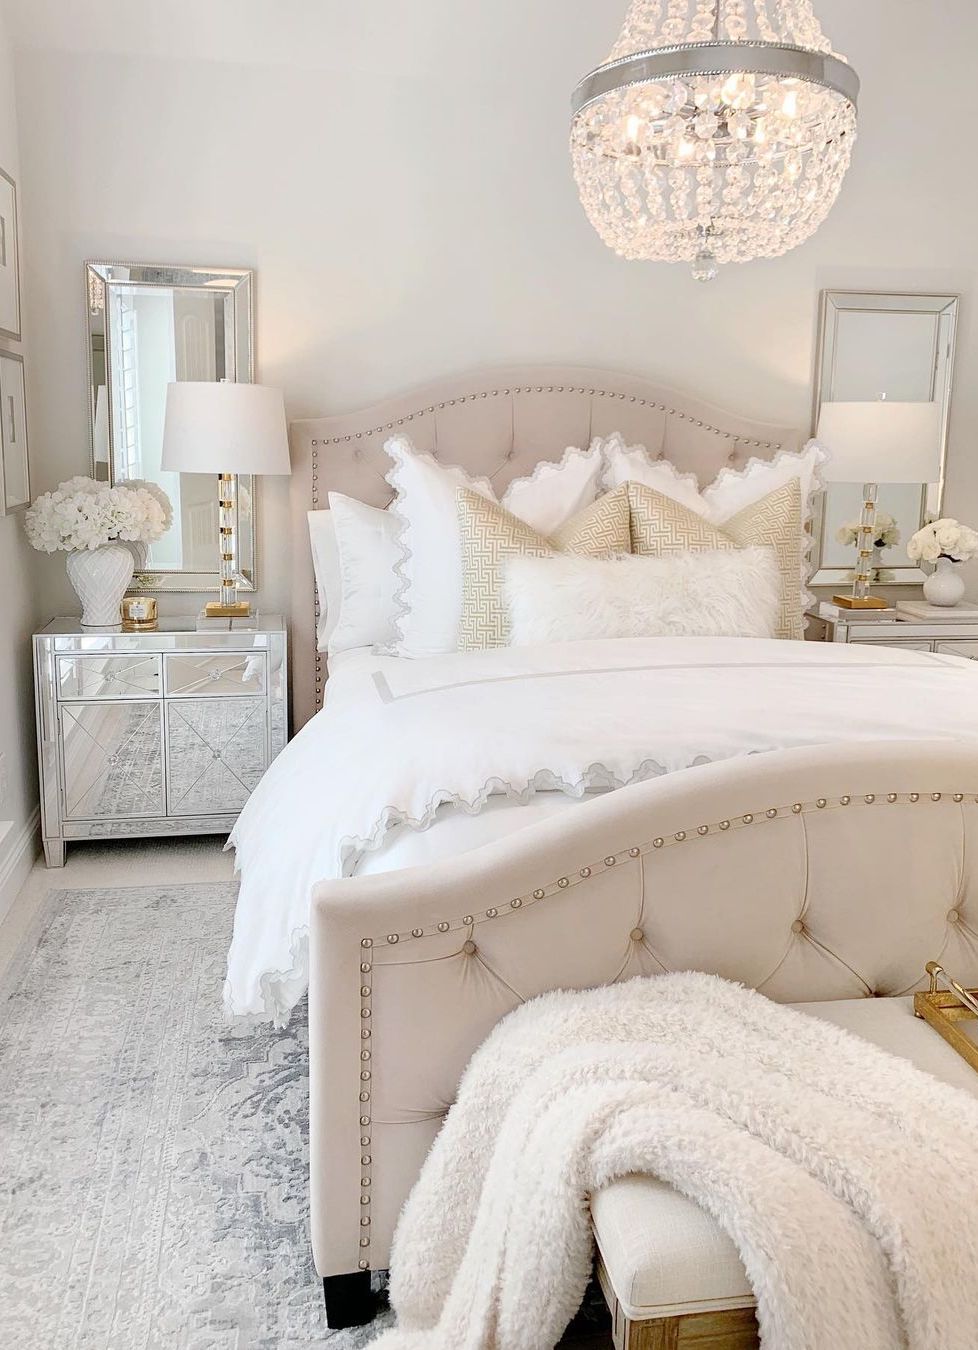 Glam Throw Pillows on a Glam Bed with Tufted Headboard via @thedecordiet